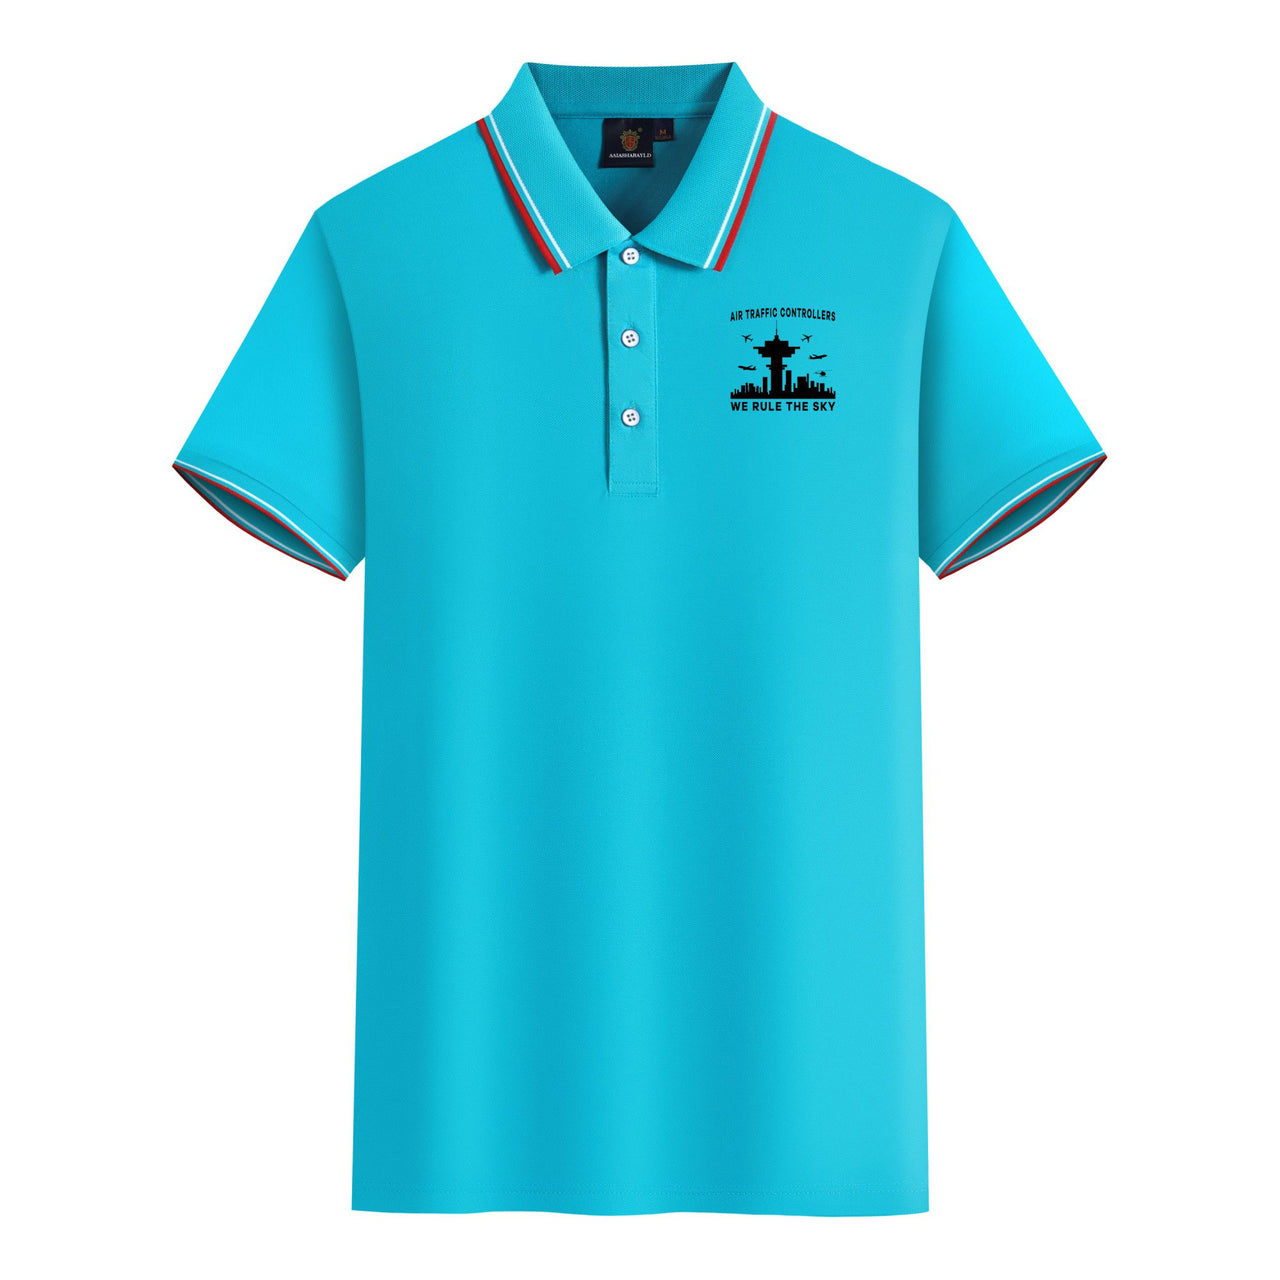 Air Traffic Controllers - We Rule The Sky Designed Stylish Polo T-Shirts